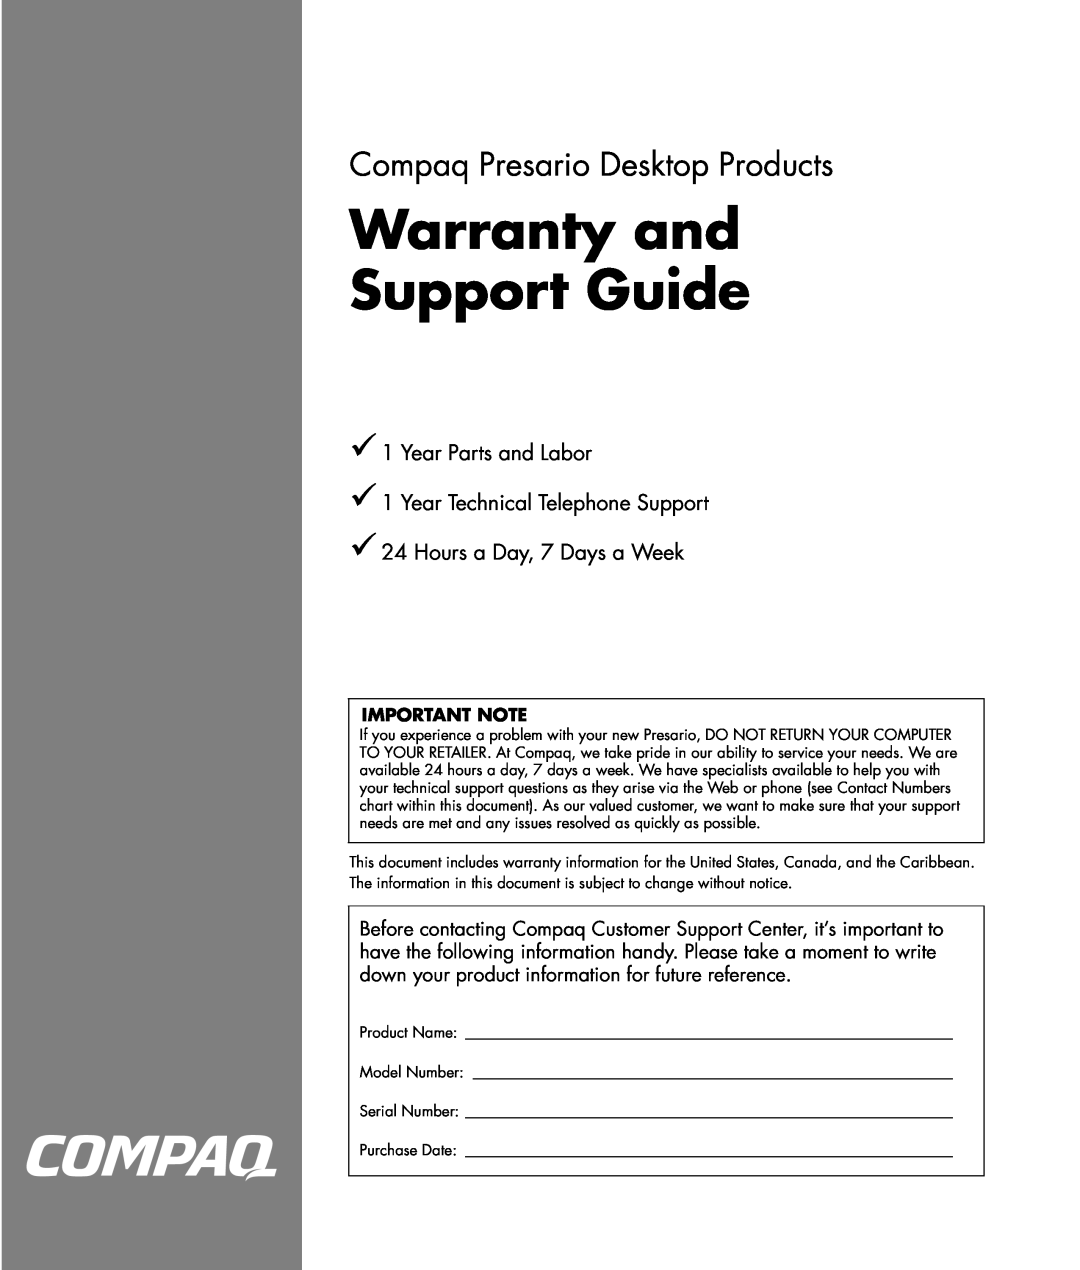 HP 8000T-P8655B, 8000T-P8655K, S6220WM manual Important Note, Warranty and Support Guide, Compaq Presario Desktop Products 